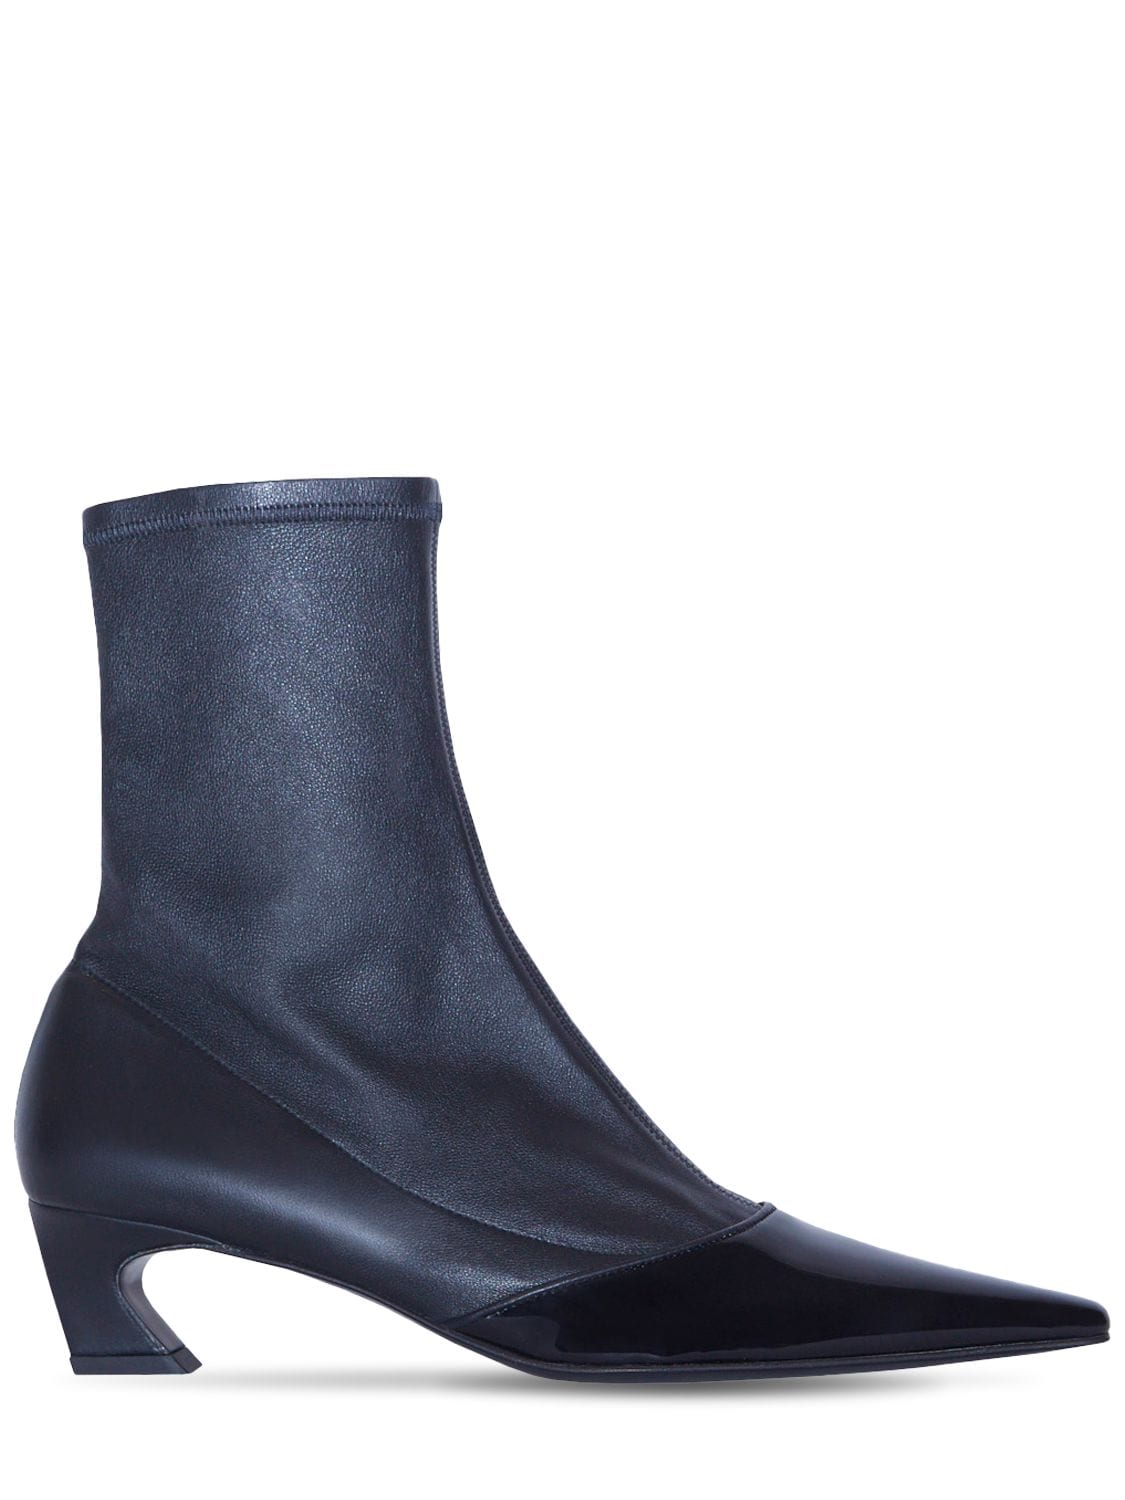 Acne Studios 45mm Leather Ankle Boots In Black,black